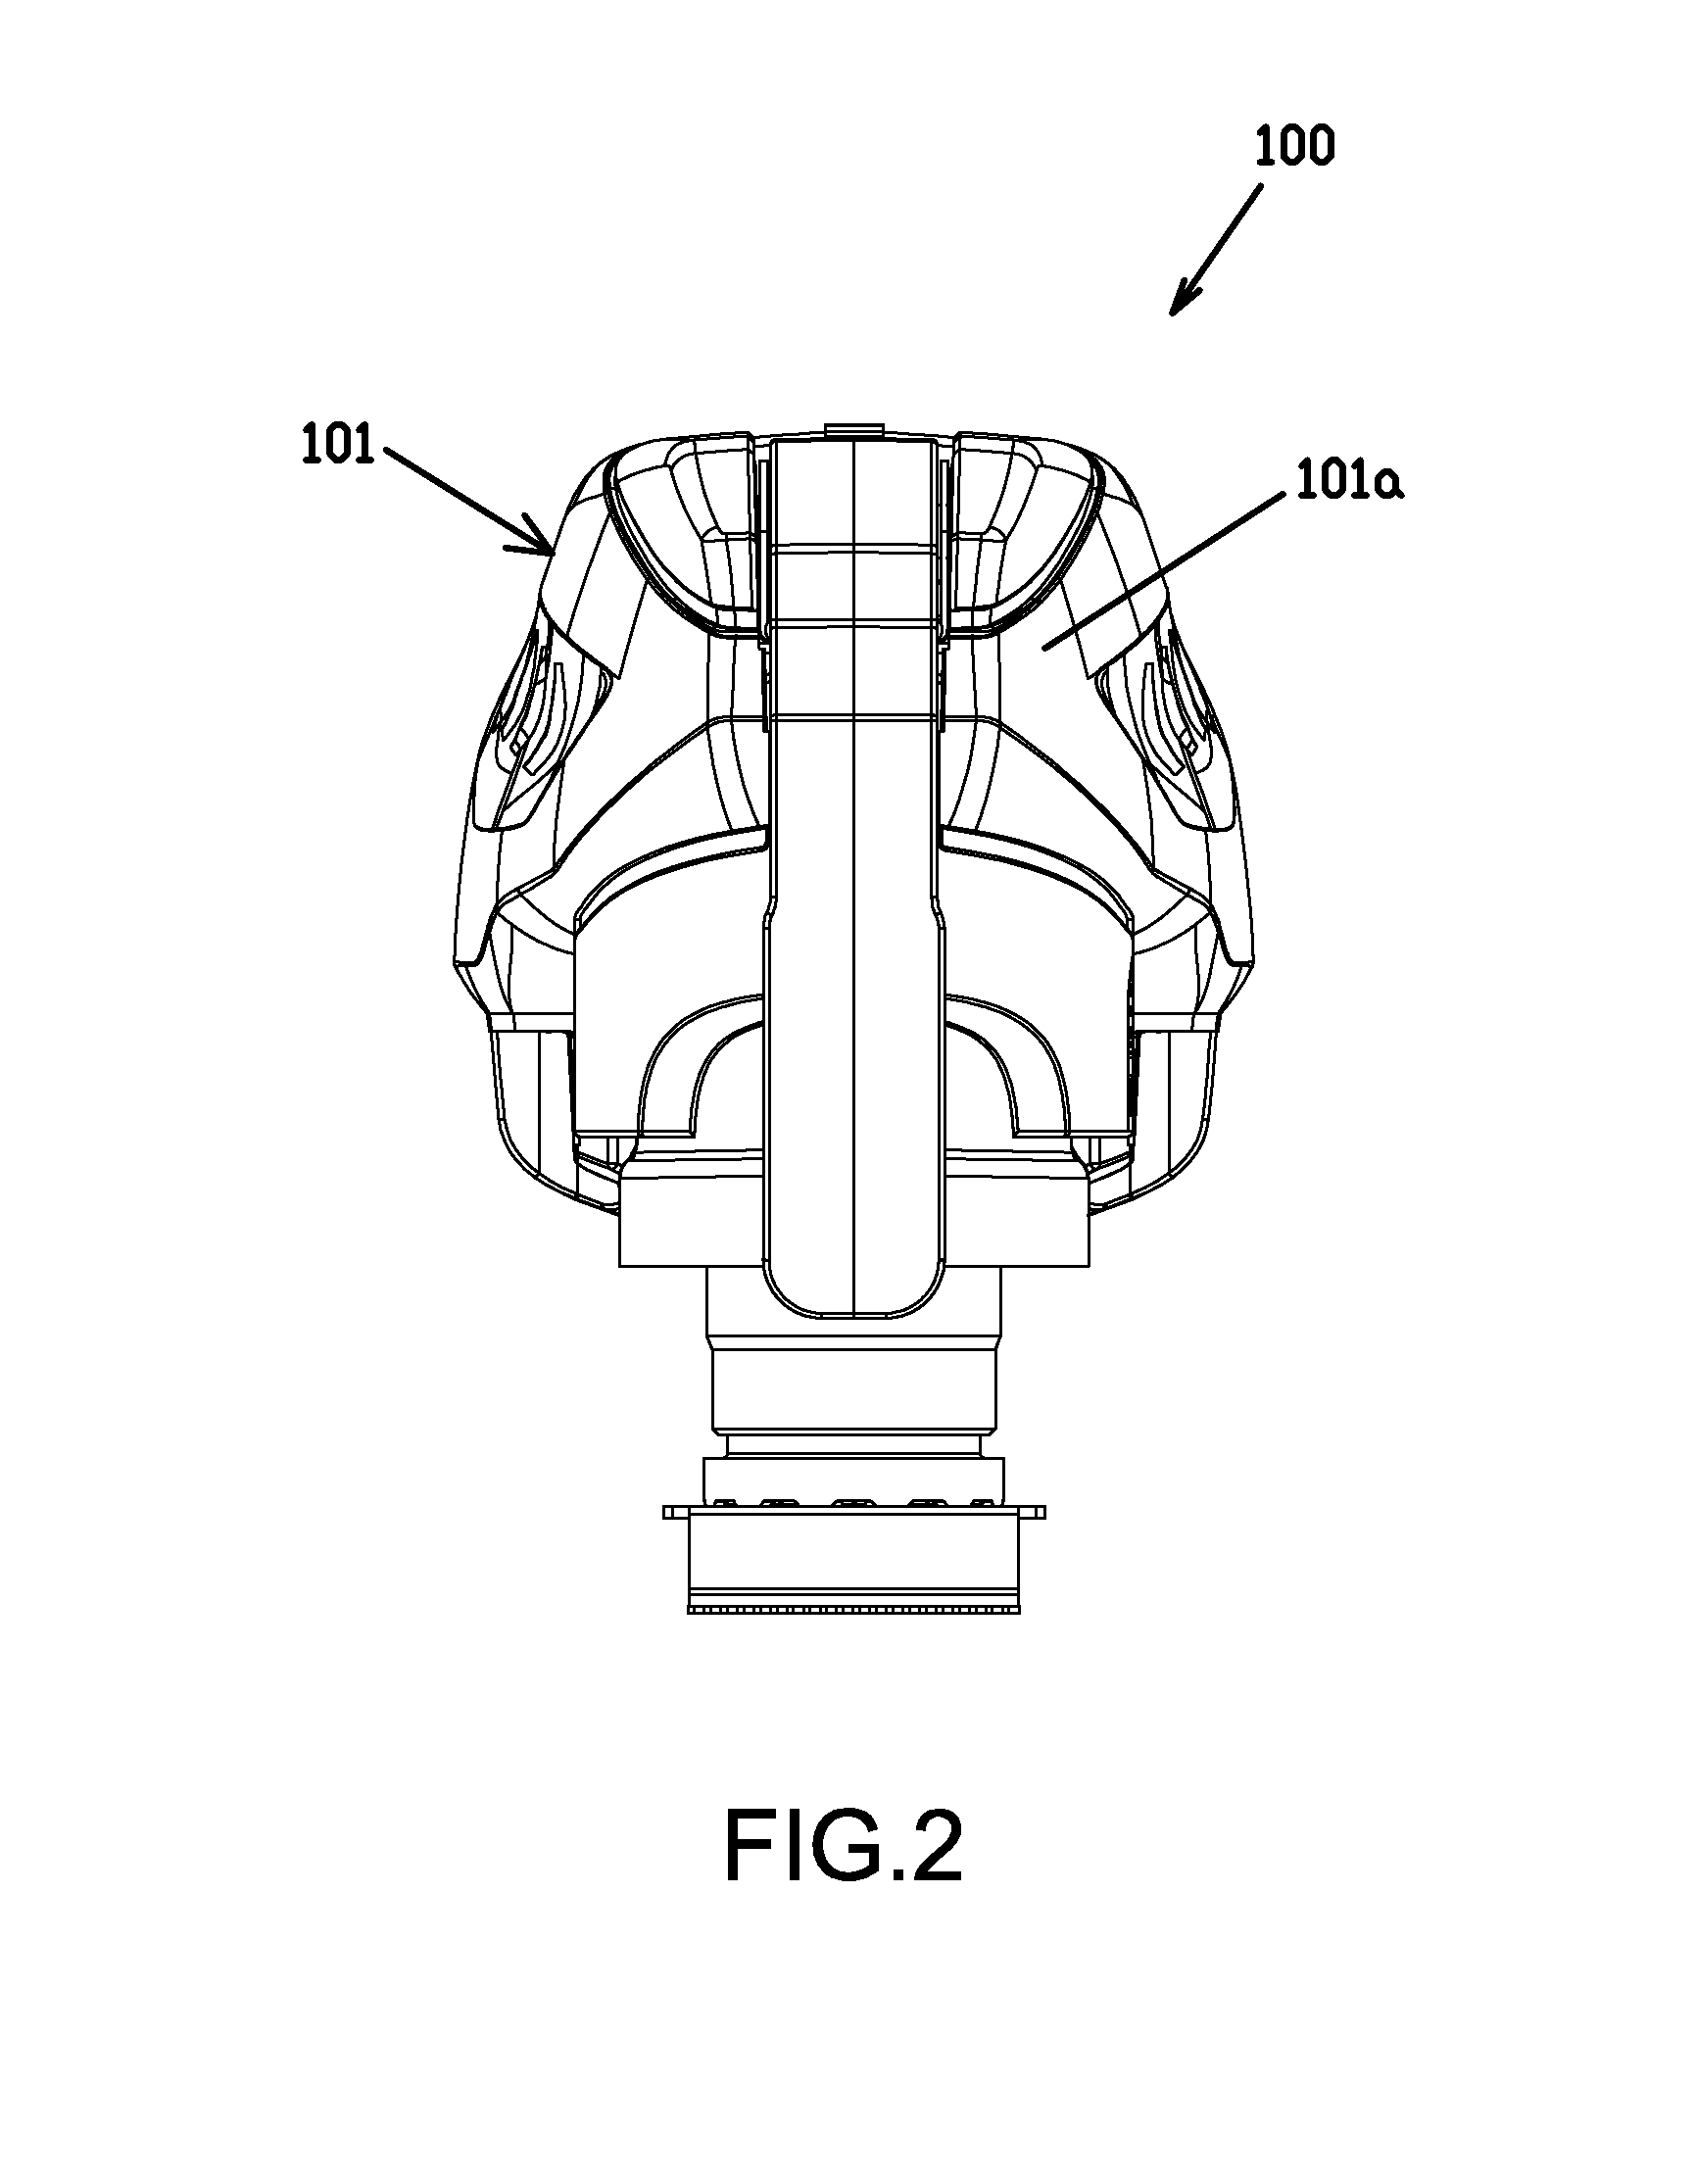 Power tool having improved tool accessory securing mechanism